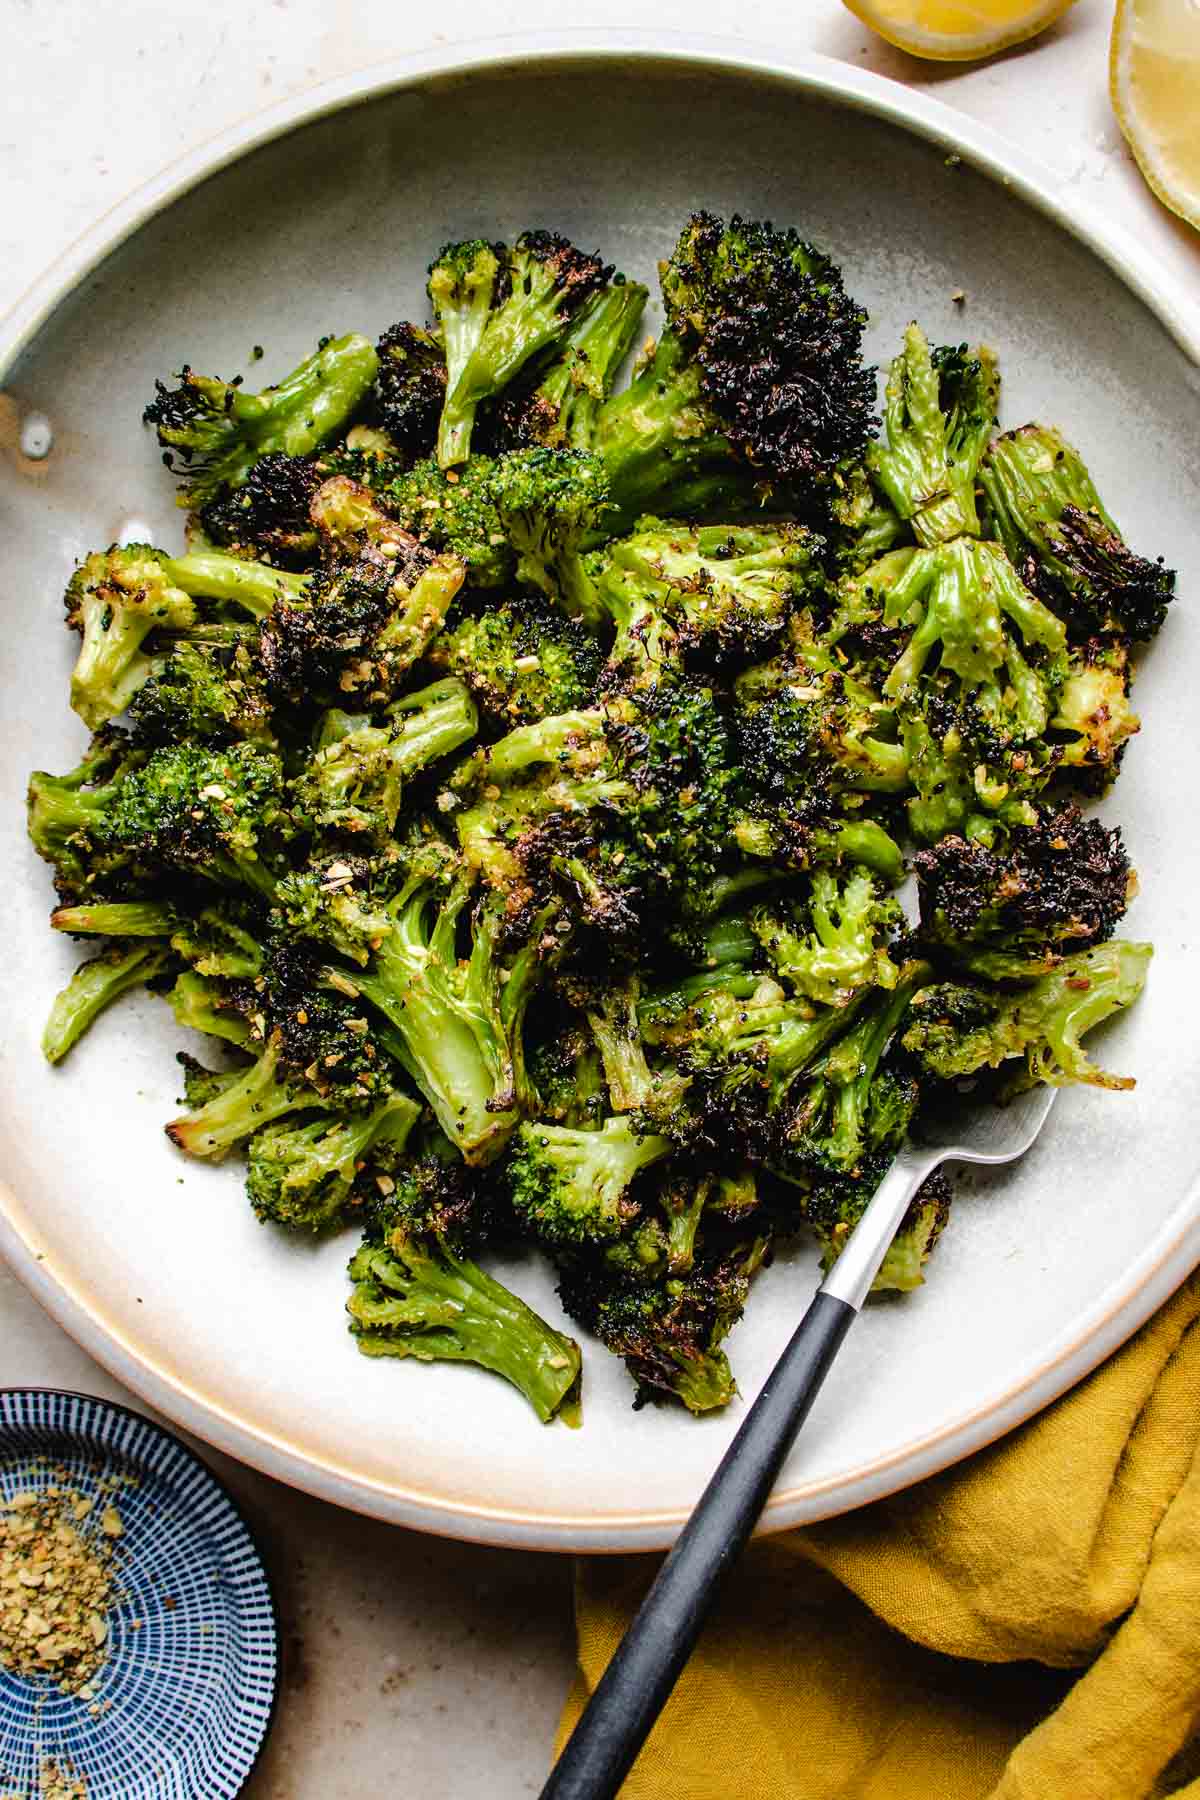 A close overhead shot shows crispy broccoli florets air fried from frozen and served in a white plate with a fork and yellow napkin on the side